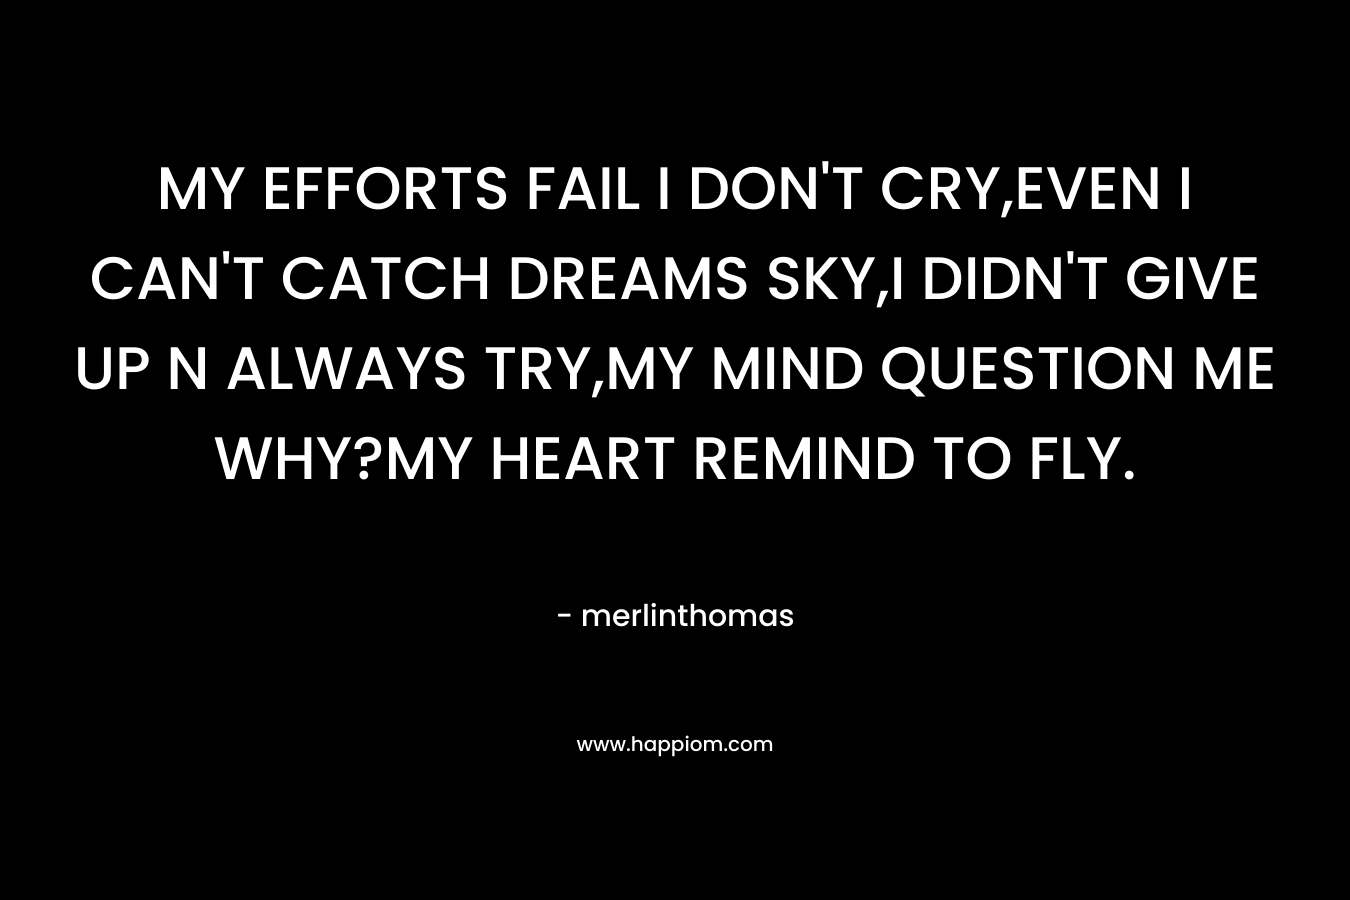 MY EFFORTS FAIL I DON'T CRY,EVEN I CAN'T CATCH DREAMS SKY,I DIDN'T GIVE UP N ALWAYS TRY,MY MIND QUESTION ME WHY?MY HEART REMIND TO FLY.